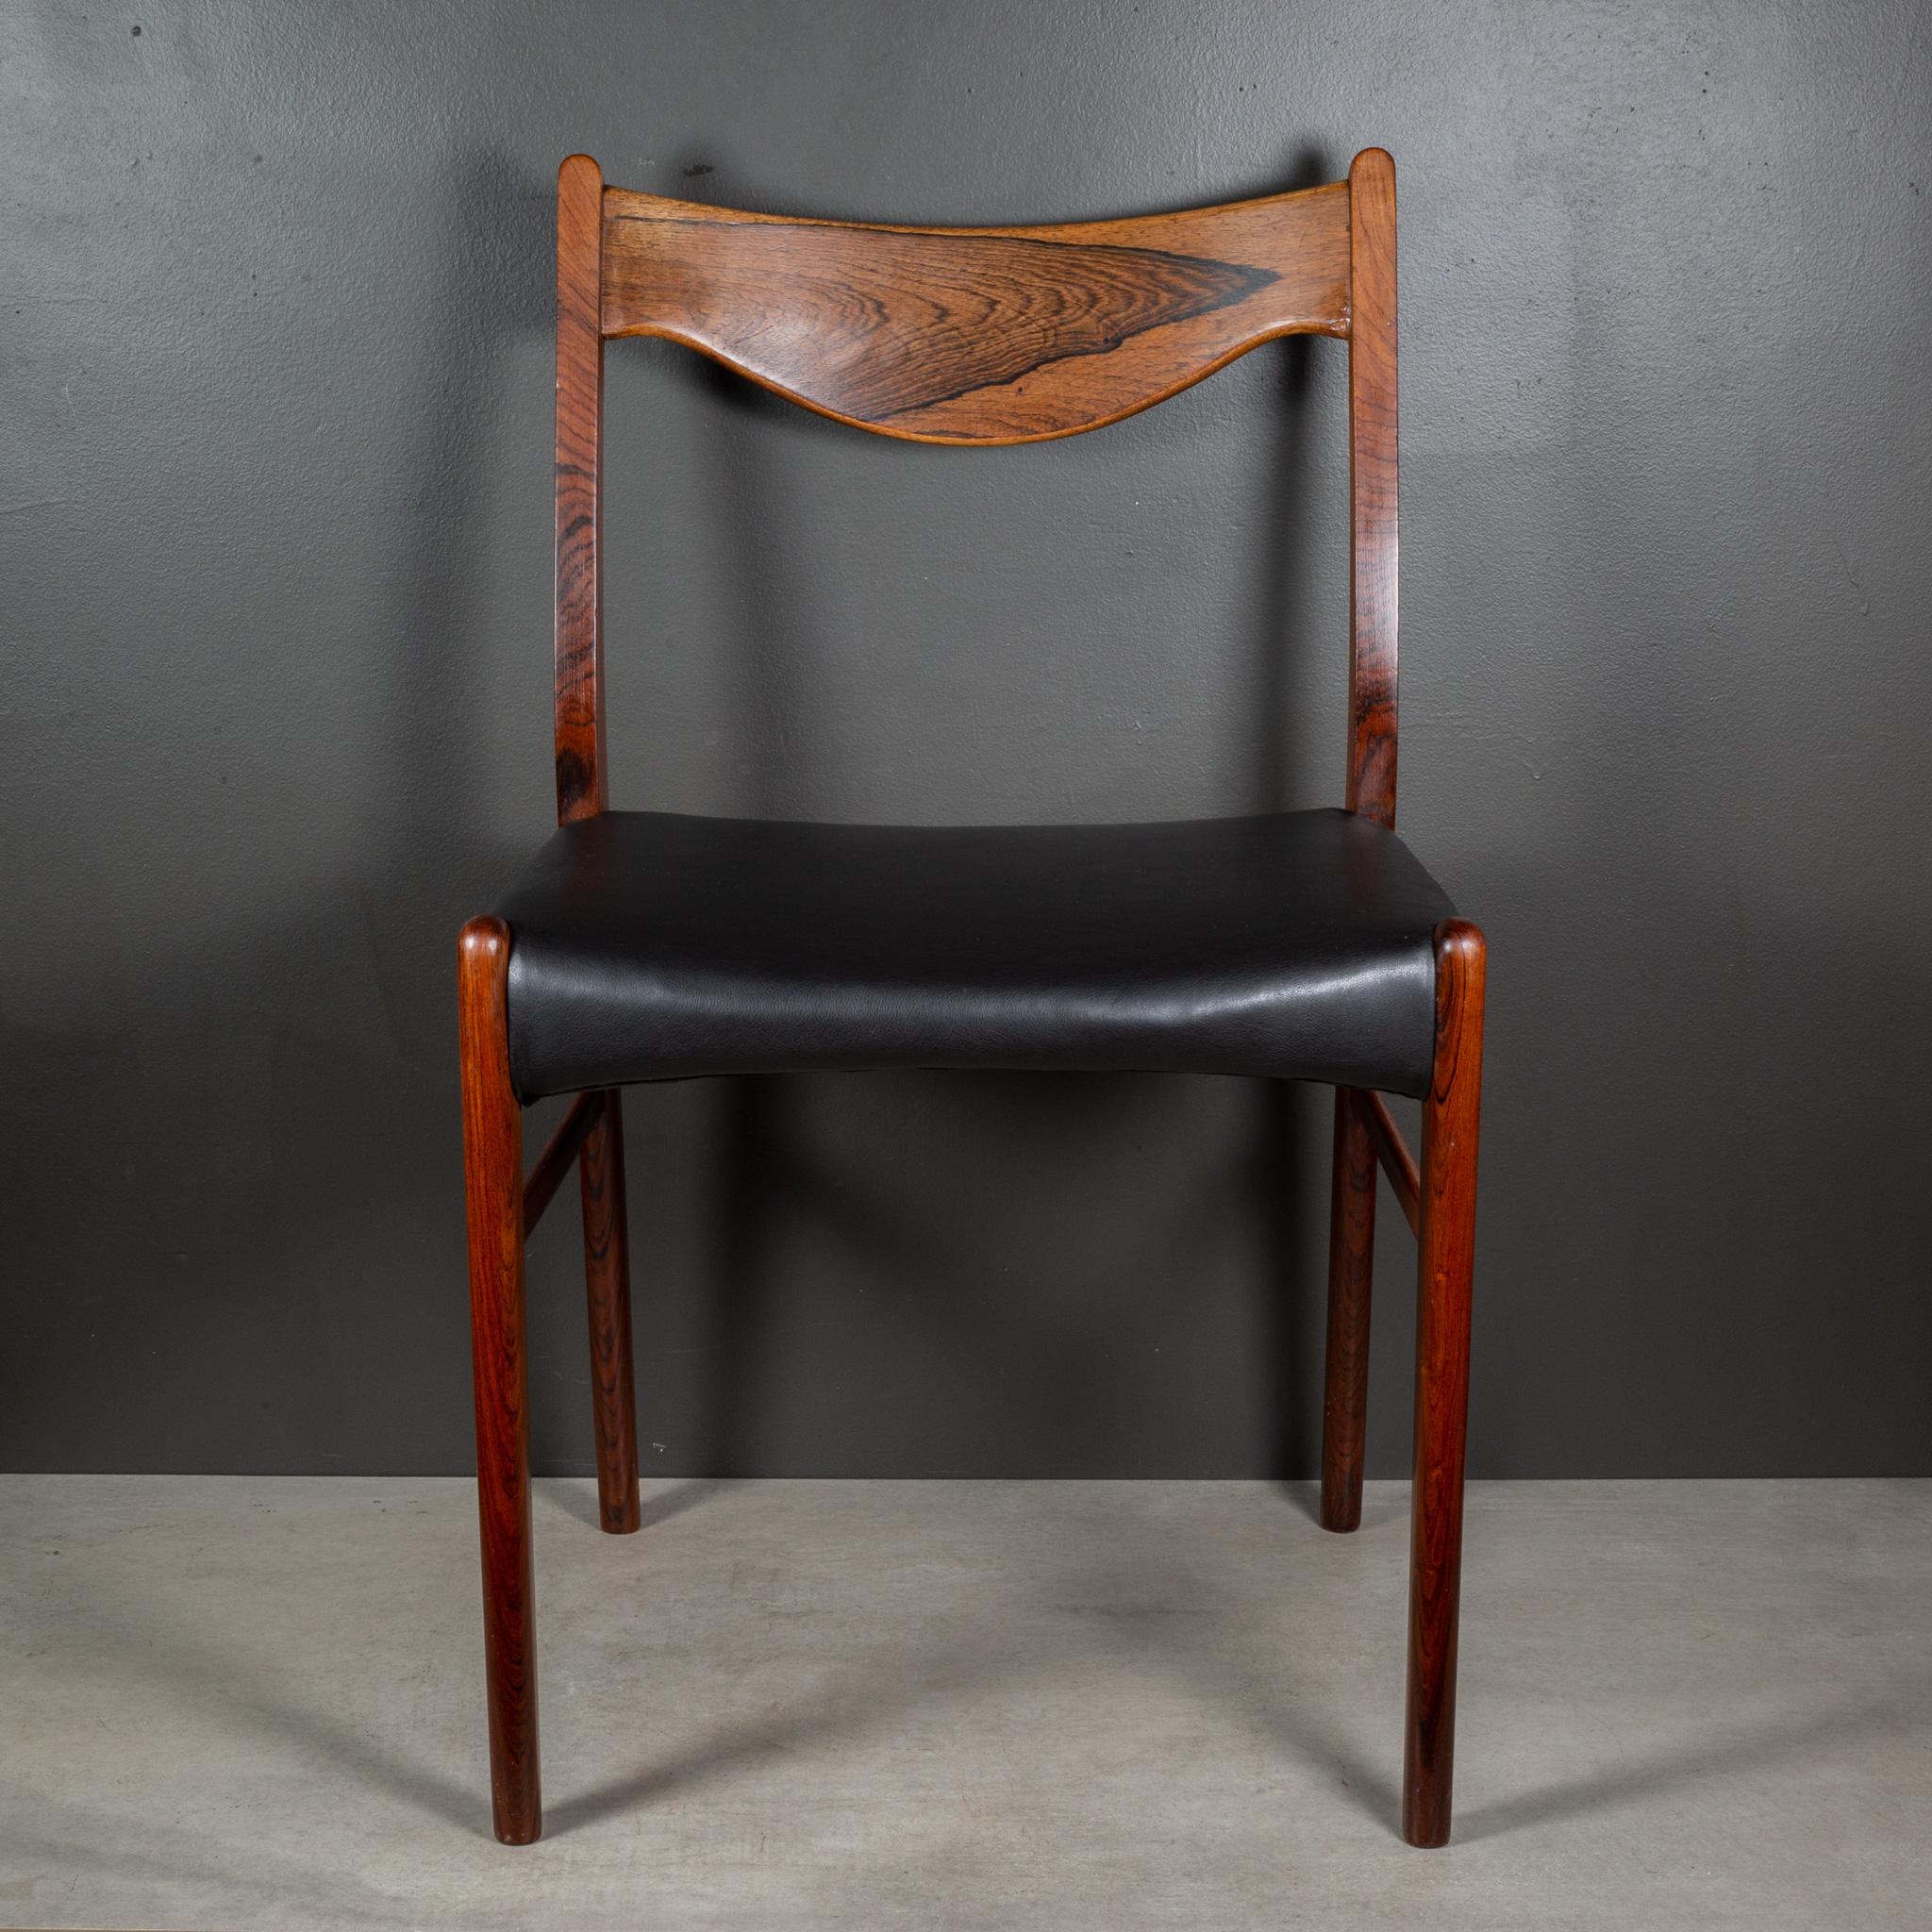 Arne Wahl Iversen Model GS61 Rosewood and Leather Dining Chairs c.1950 For Sale 1